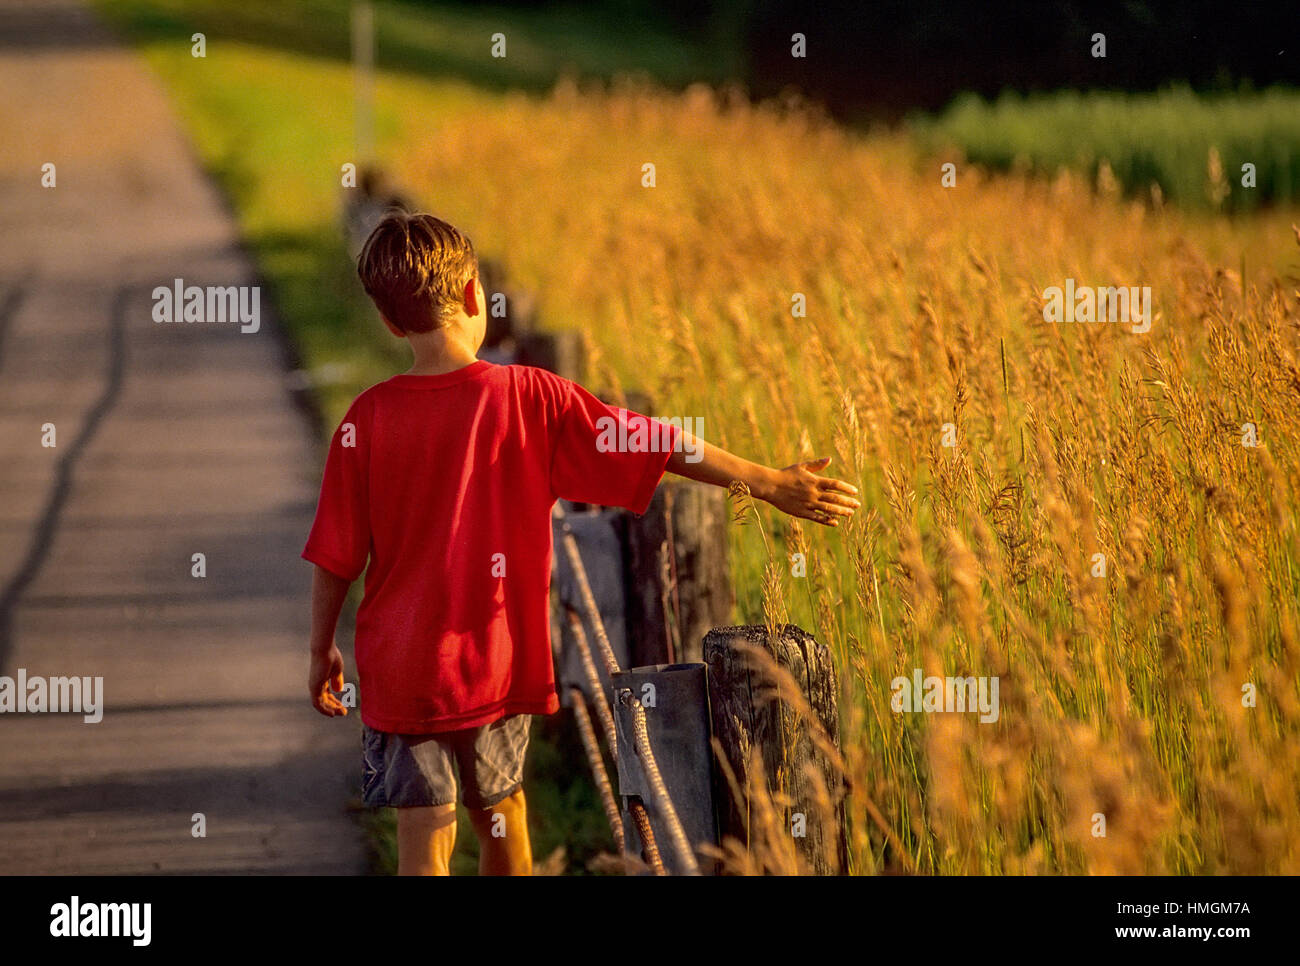 An eight year old boy in a red shirt walks along a country road running his hand through tall, golden colored grass in Plainfield, New Hampshire, Unit Stock Photo